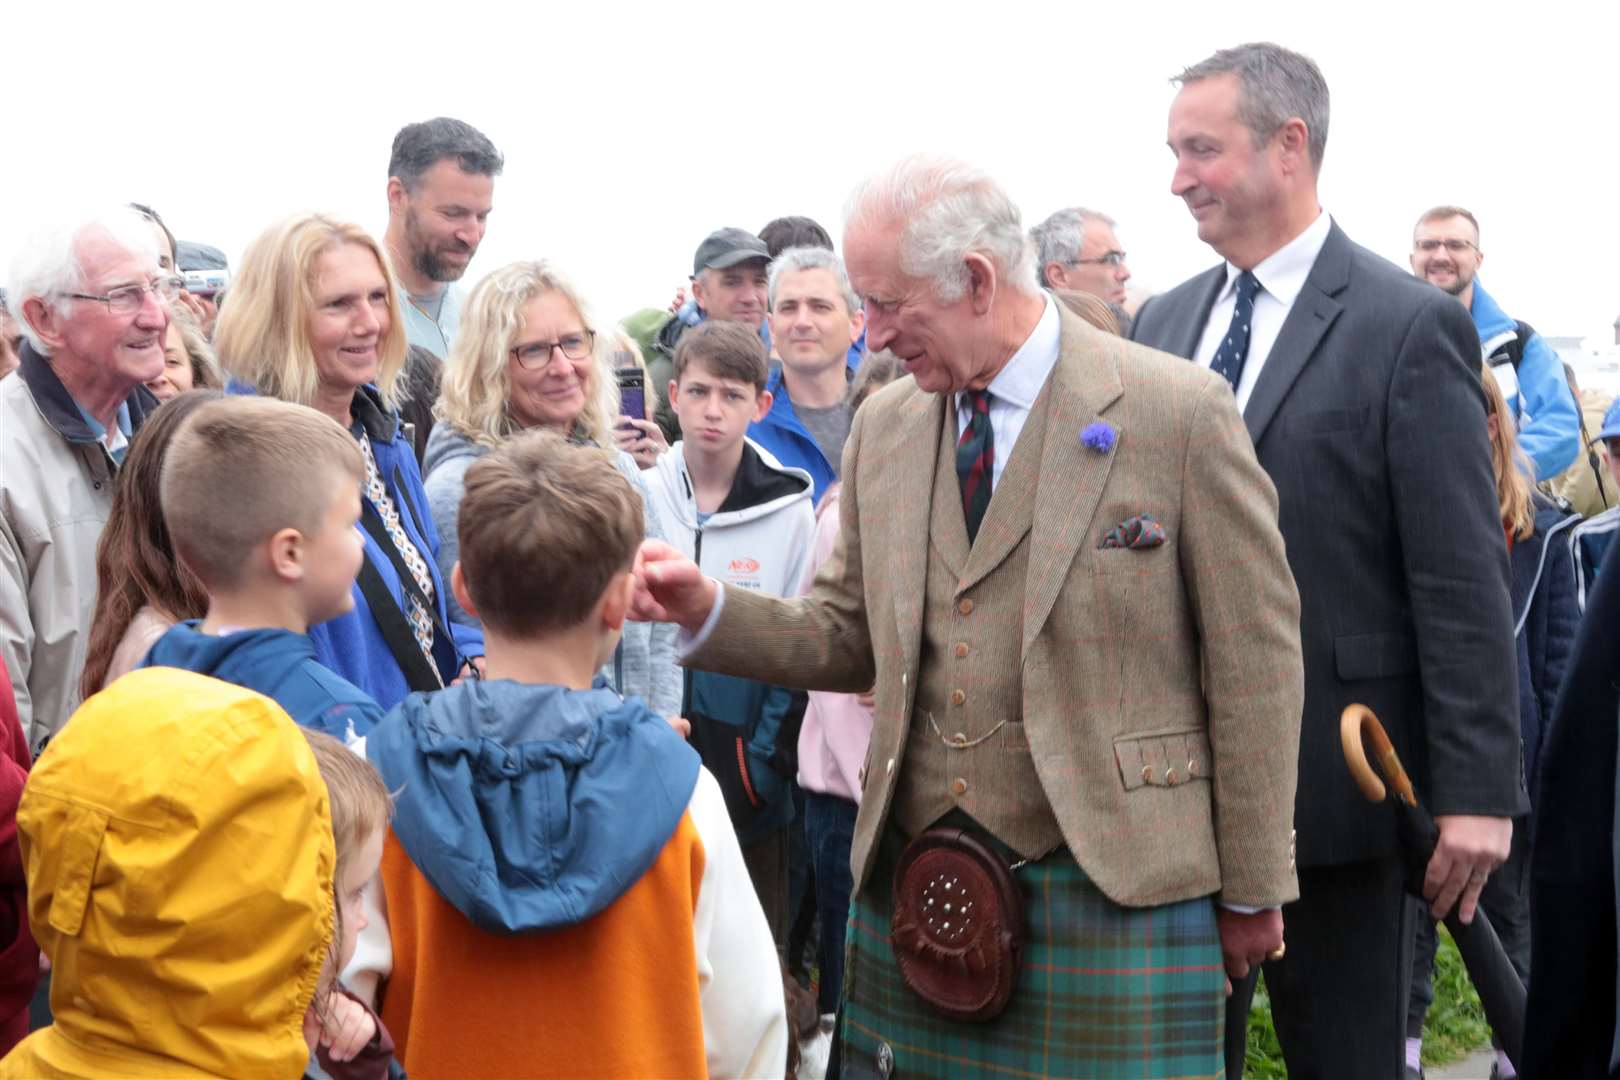 His Majesty meets some of the onlookers outside the distillery. Picture: PA